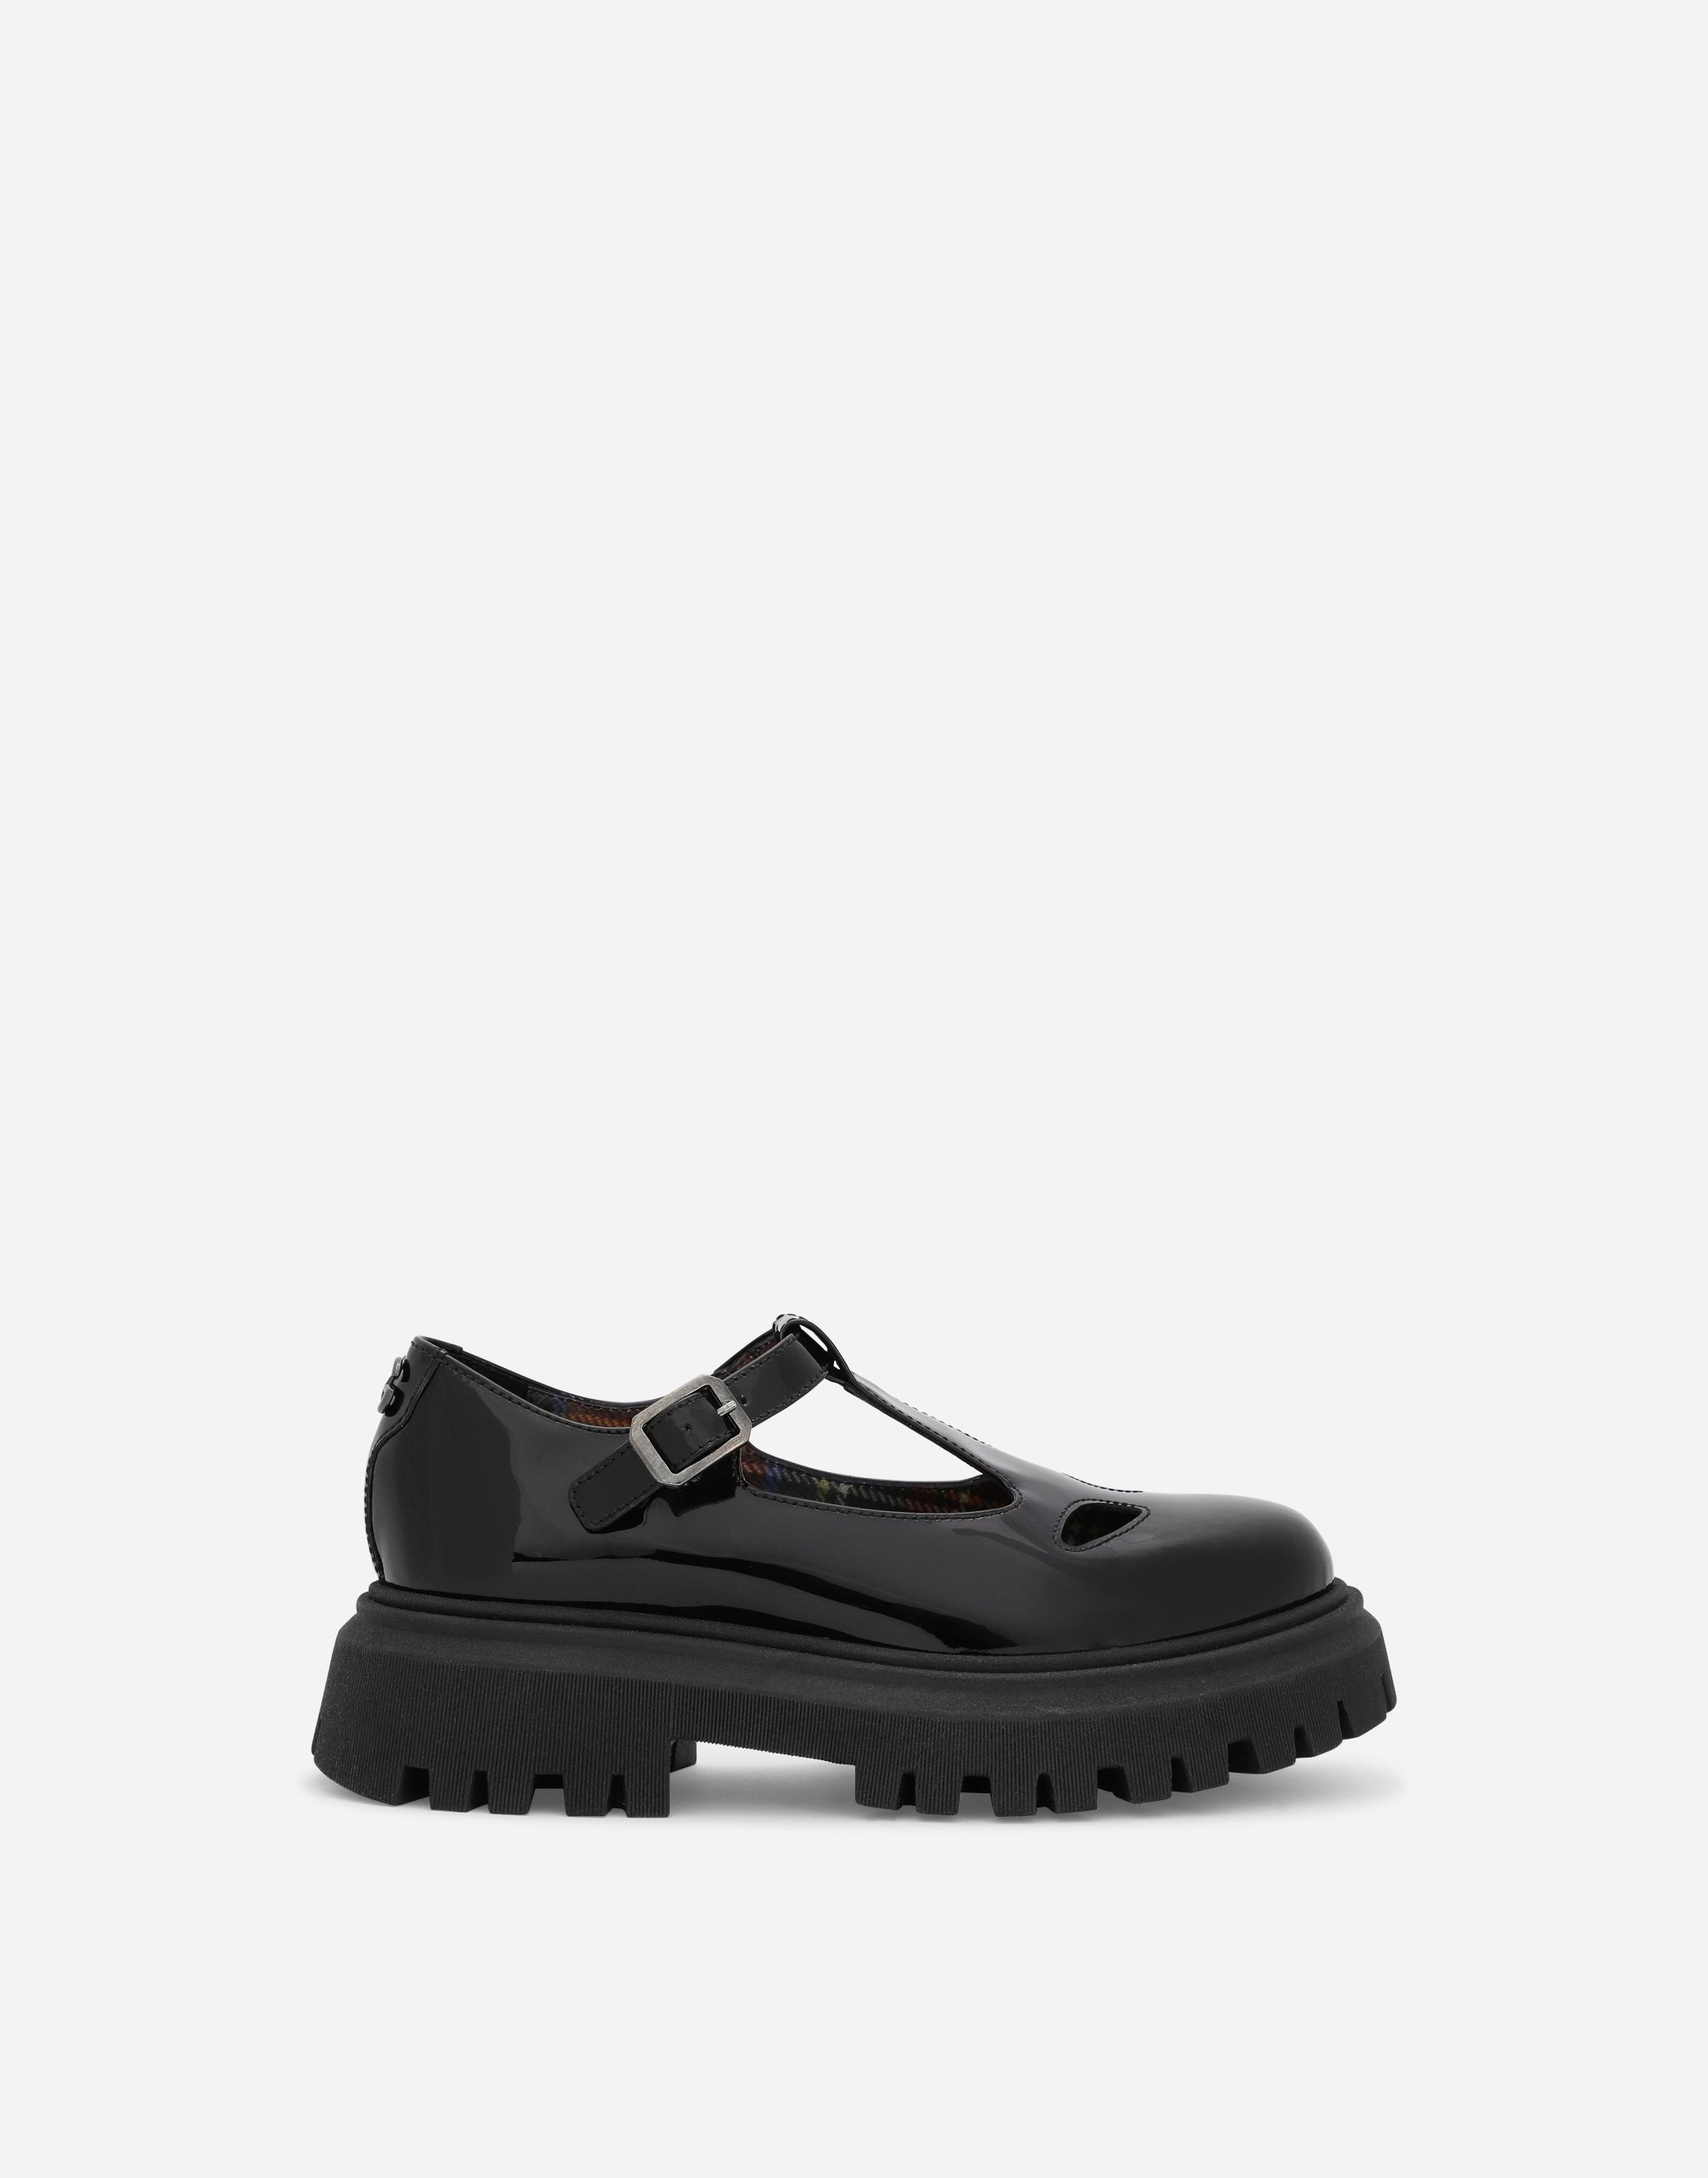 Dolce & Gabbana Kids' Two-hole Patent Leather Ballet Flats In Black